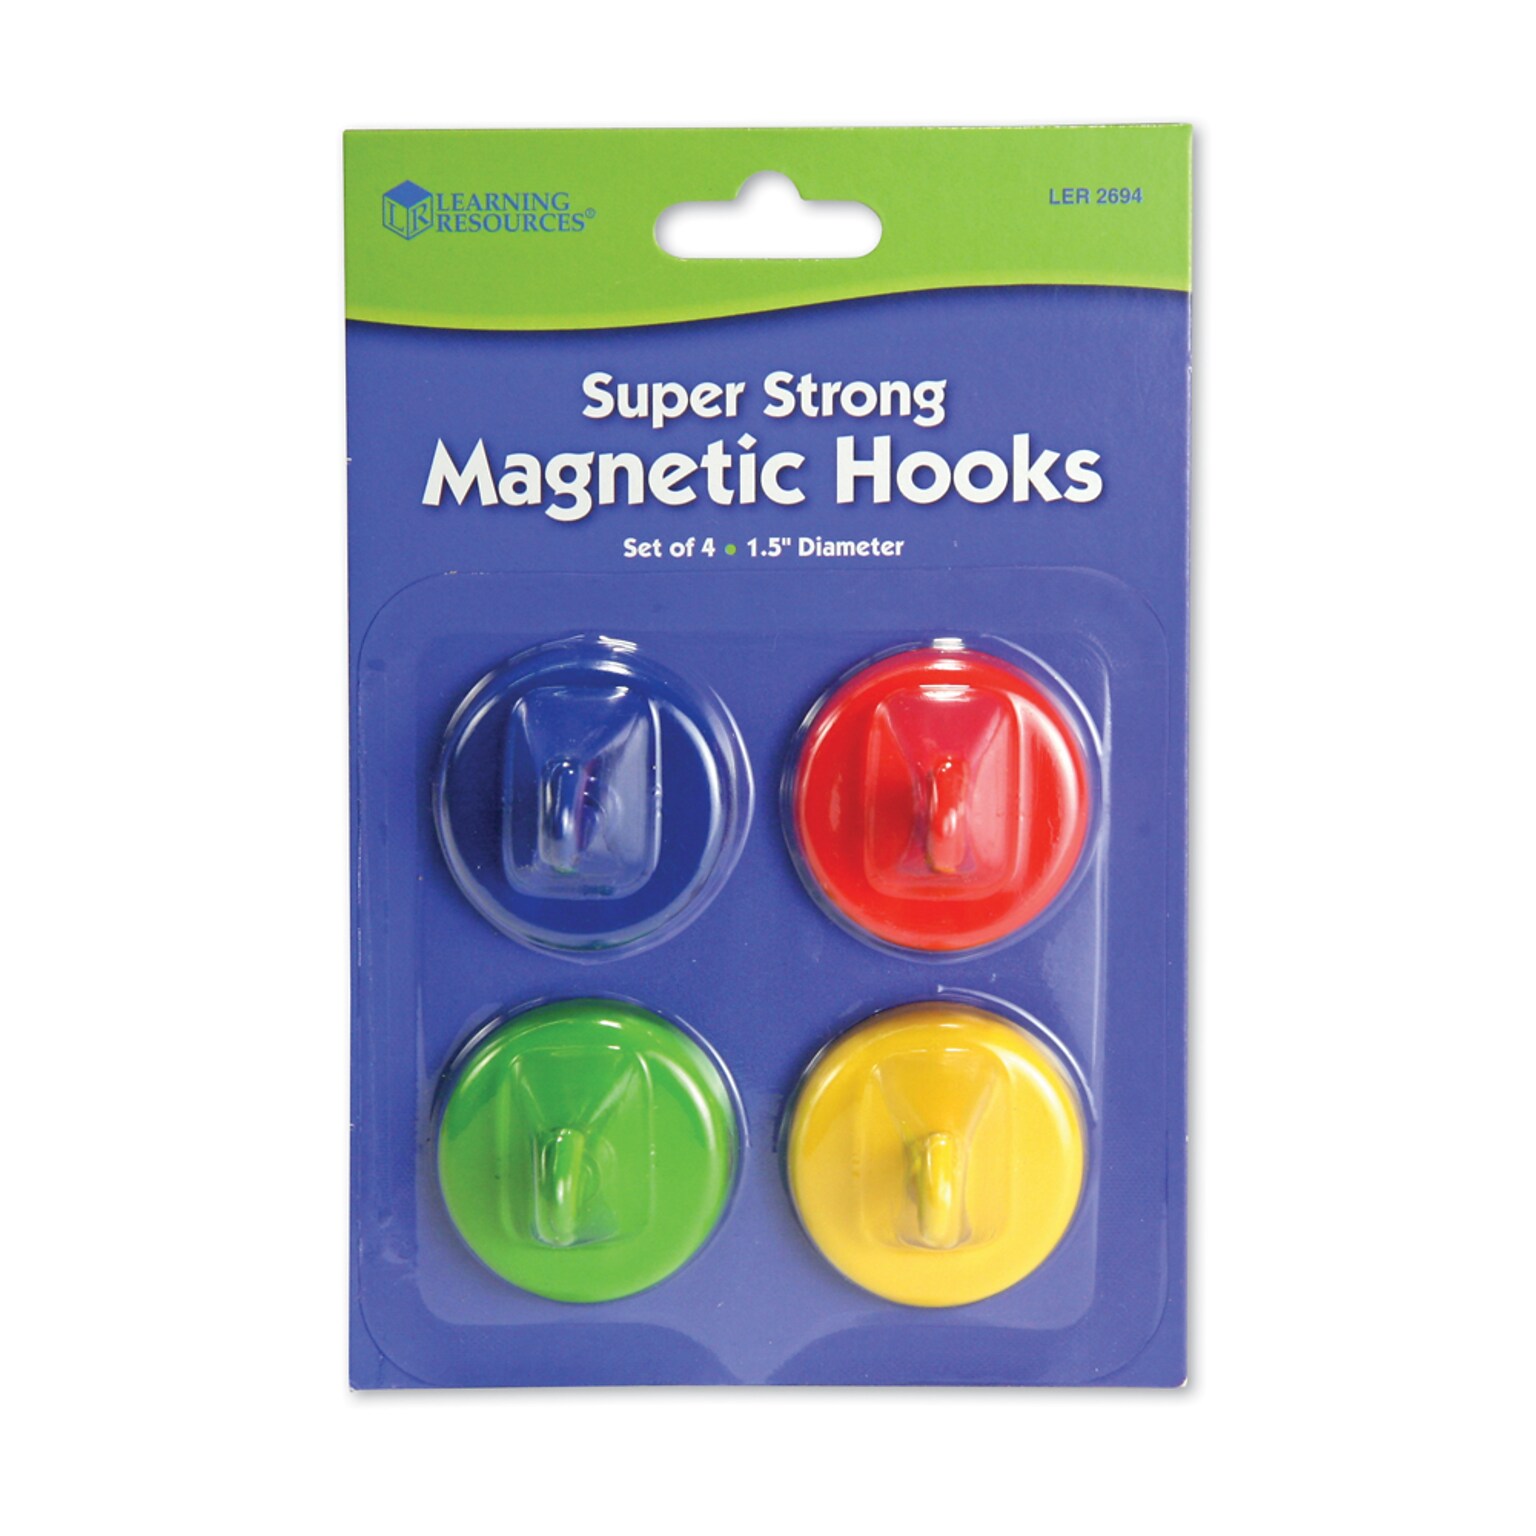 Learning Resources Super Strong Magnetic Hooks 1.5 in Diameter, 4 Pieces (LER2694)